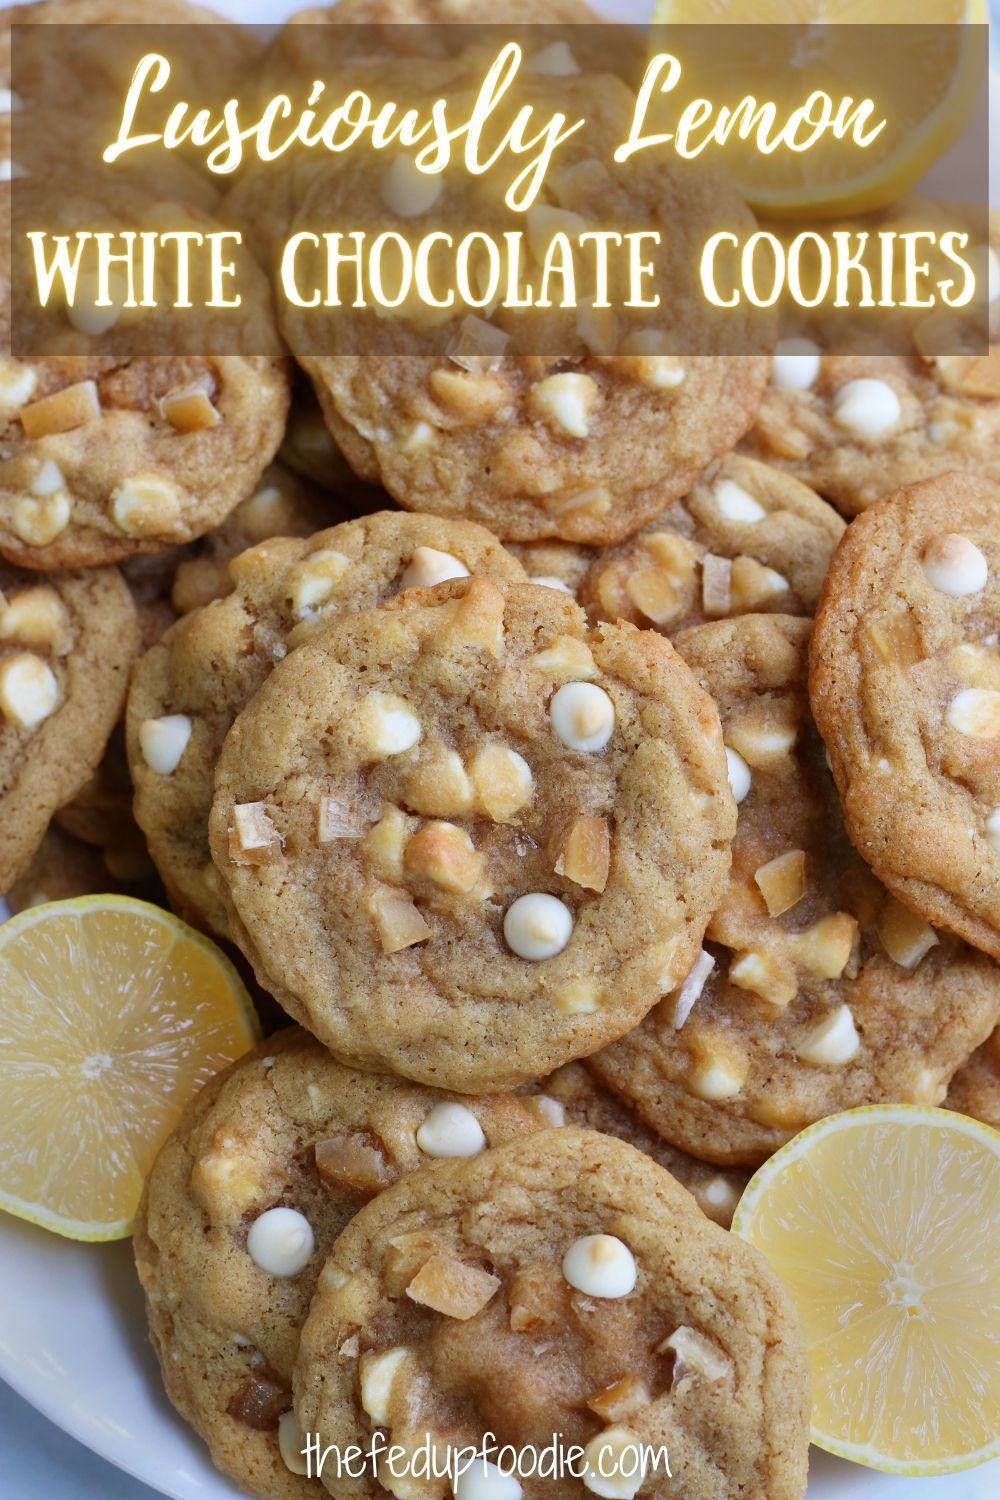 Soft and chewy Lemon White Chocolate Cookies has three layers of lemon making them perfect for lemon lovers. An easy, bright and comforting cookie perfect for many events. 
#LemonWhiteChocolateChipCookies #LemonWhiteChocolateCookies #BestLemonCookies #SoftLemonCookies #LemonWhiteChocolateCookiesRecipes #LemonCookiesWithWhiteChocolateChips #LemonAndWhiteChocolateCookies